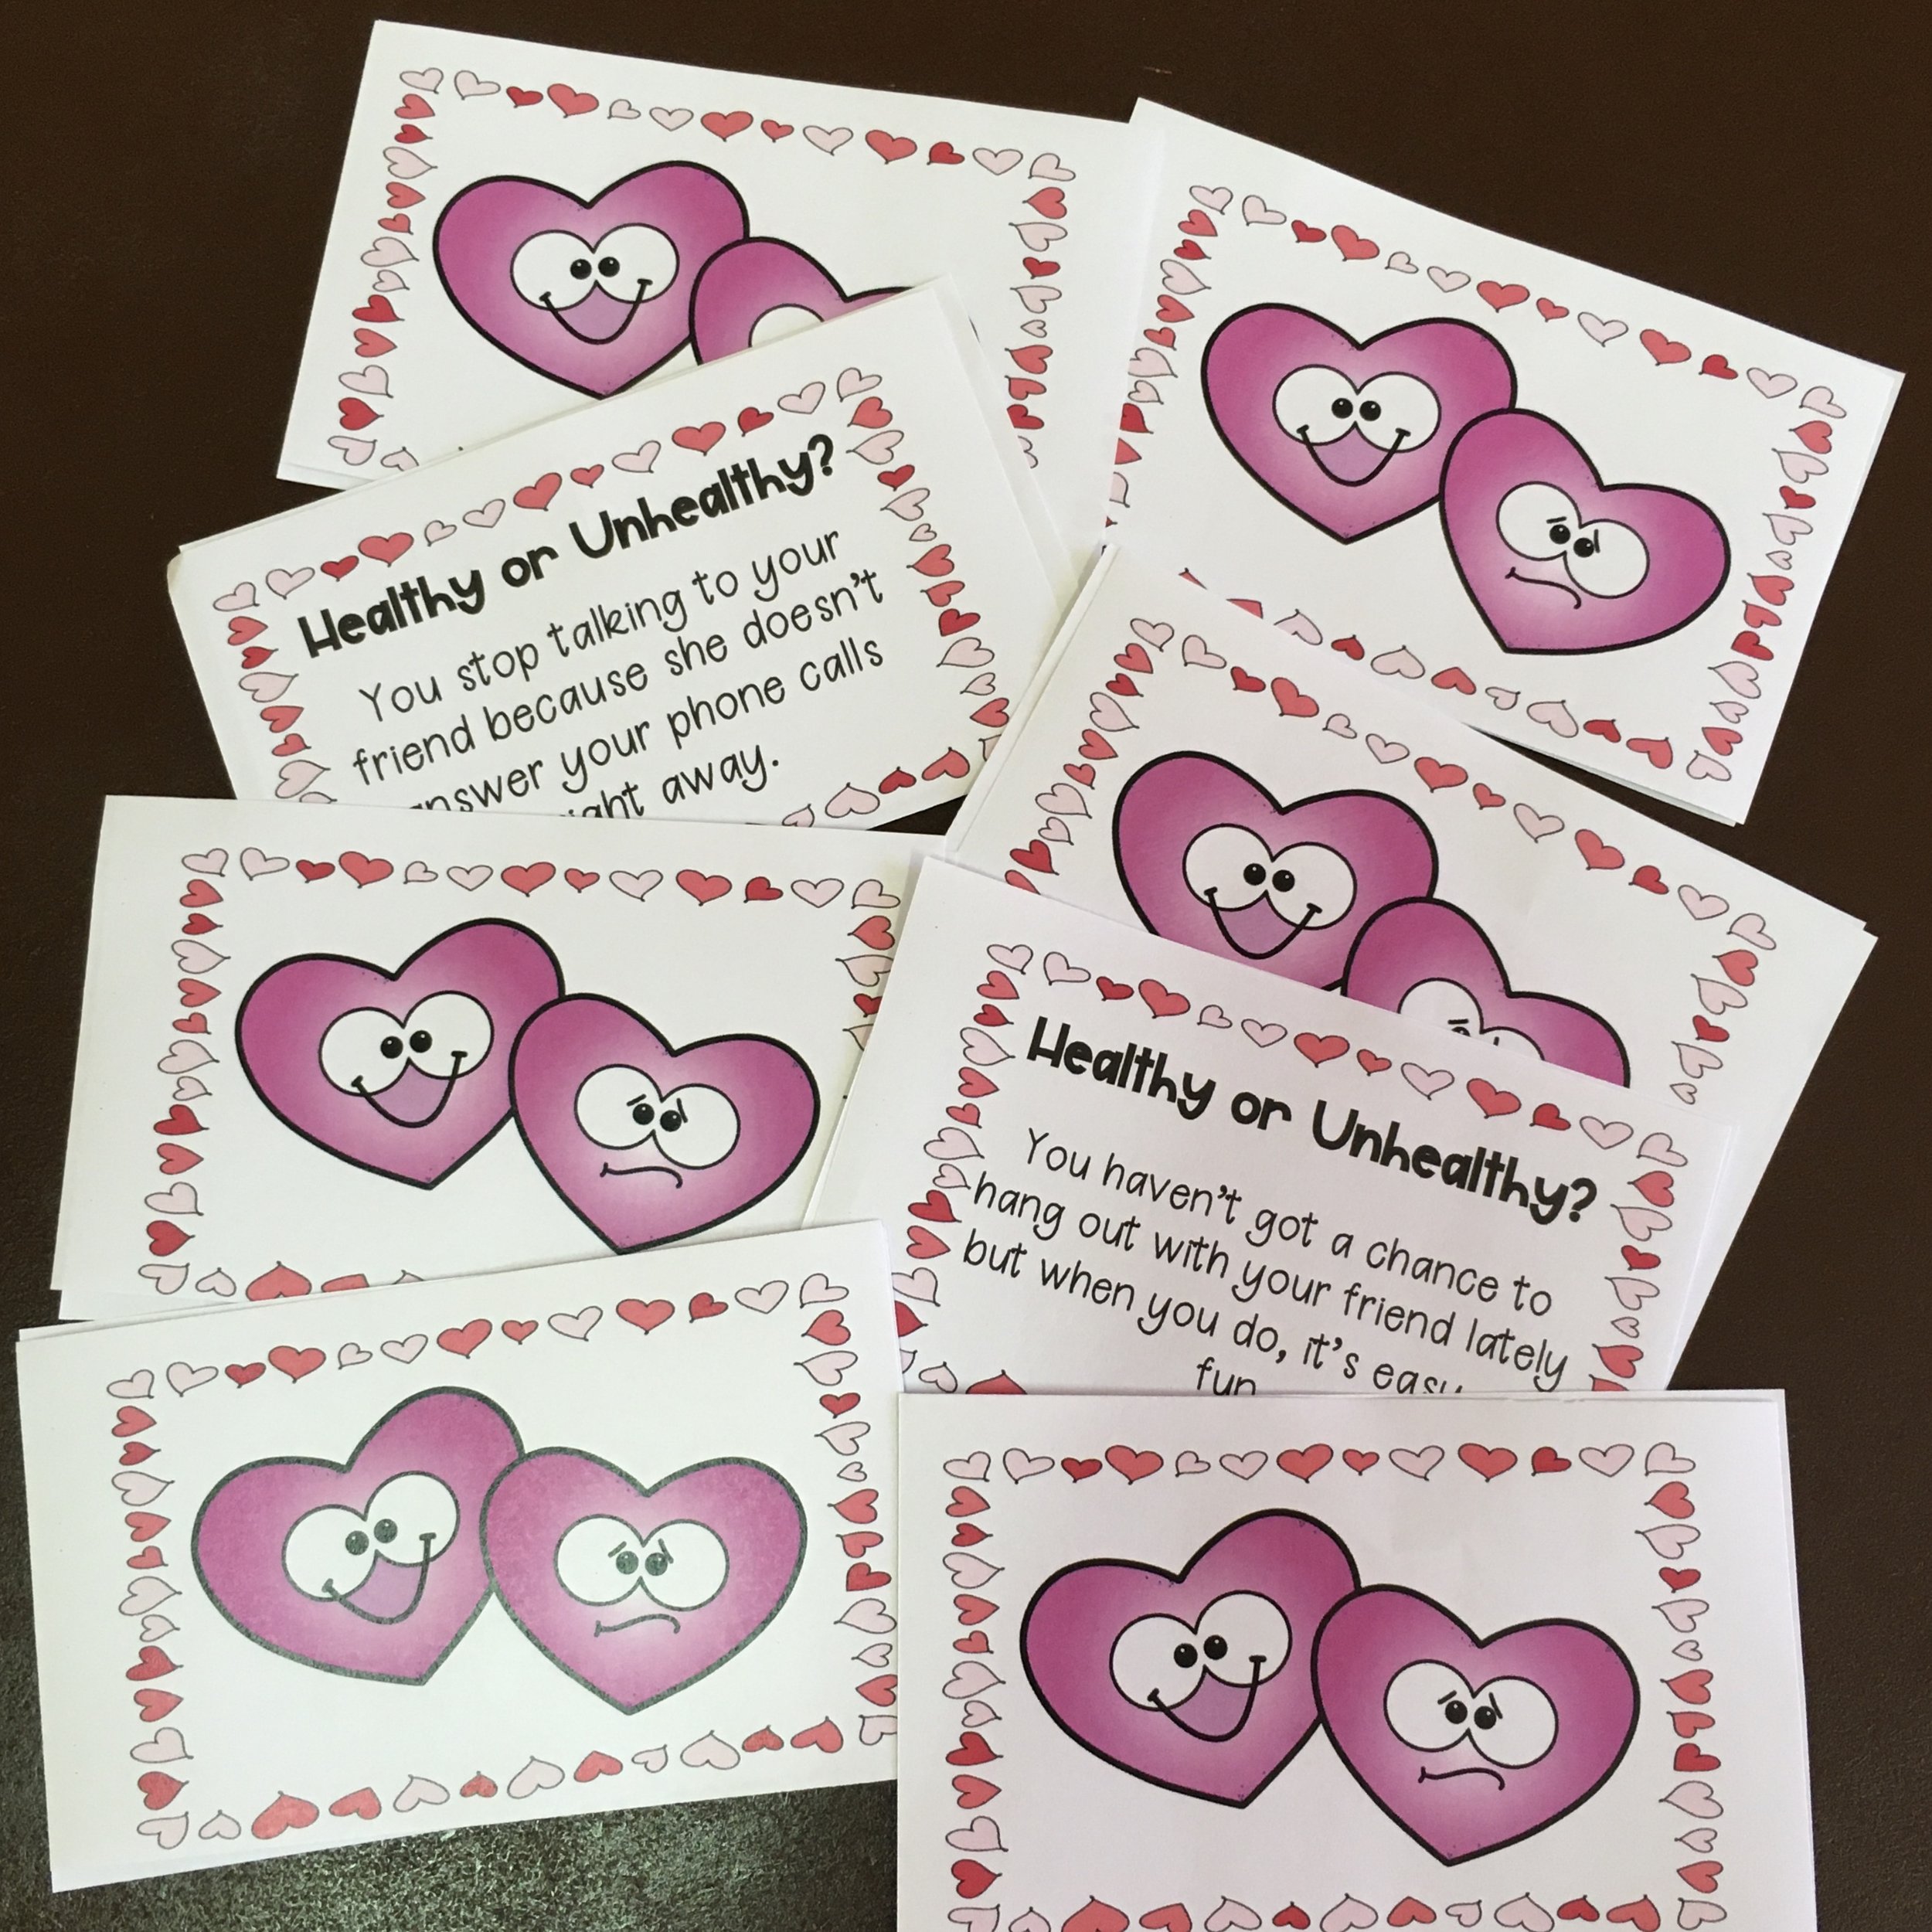 friendships discussion cards